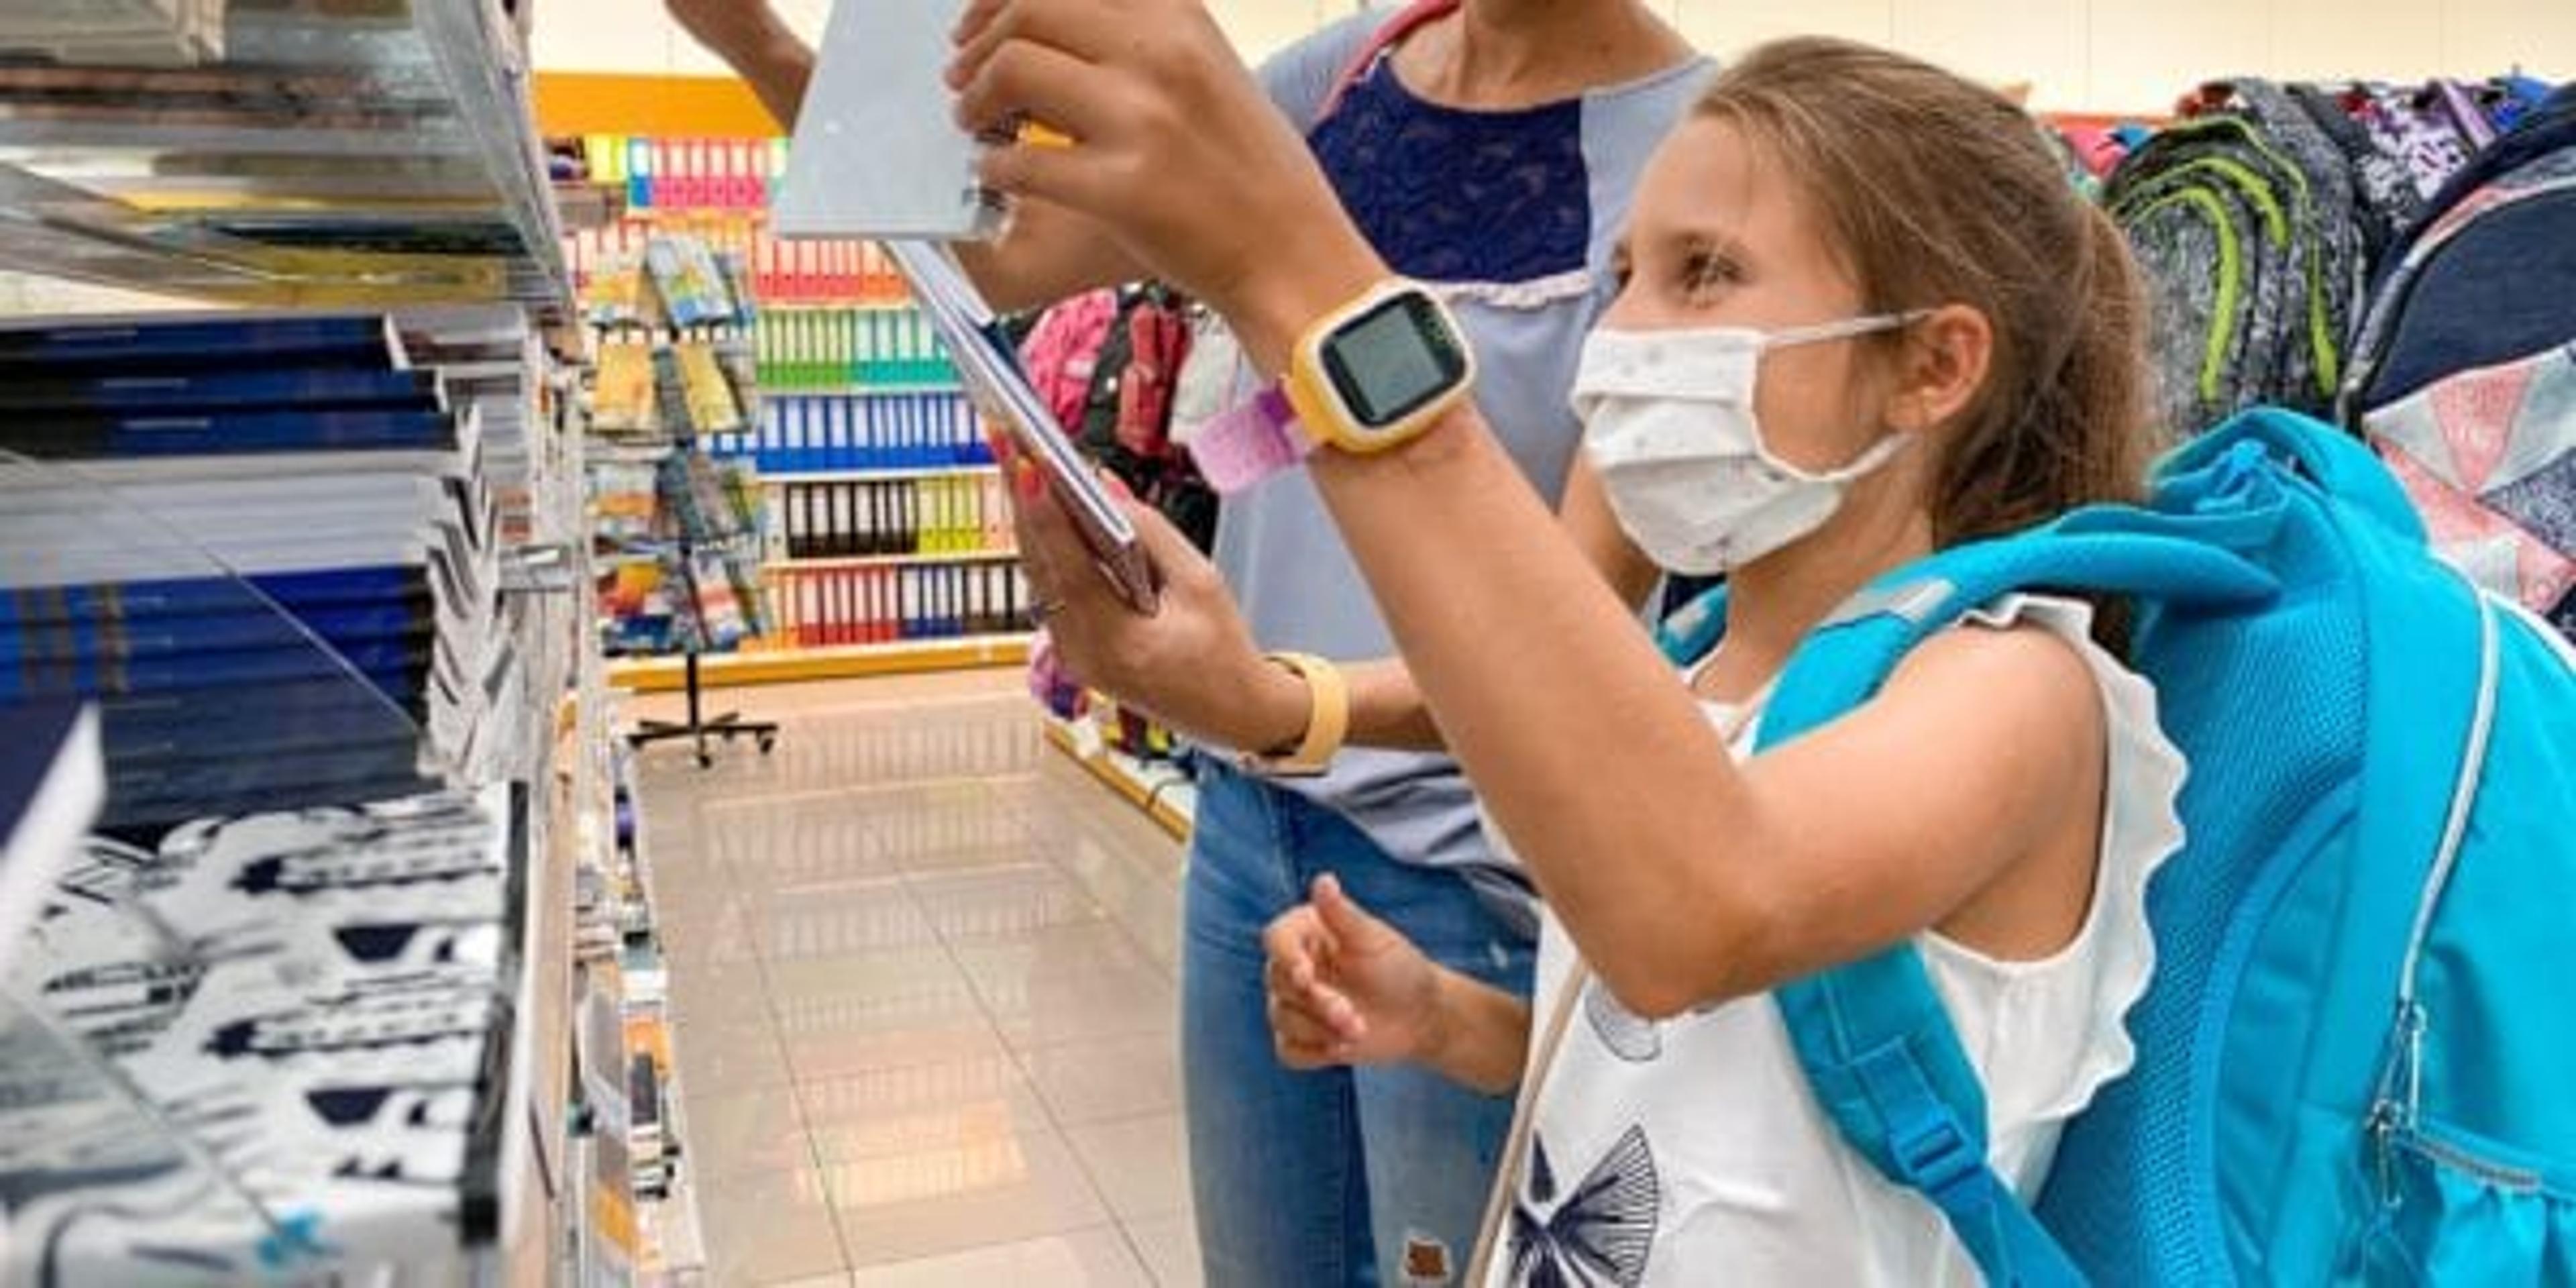 Little girl picking out school supplies with her mom, both wearing masks